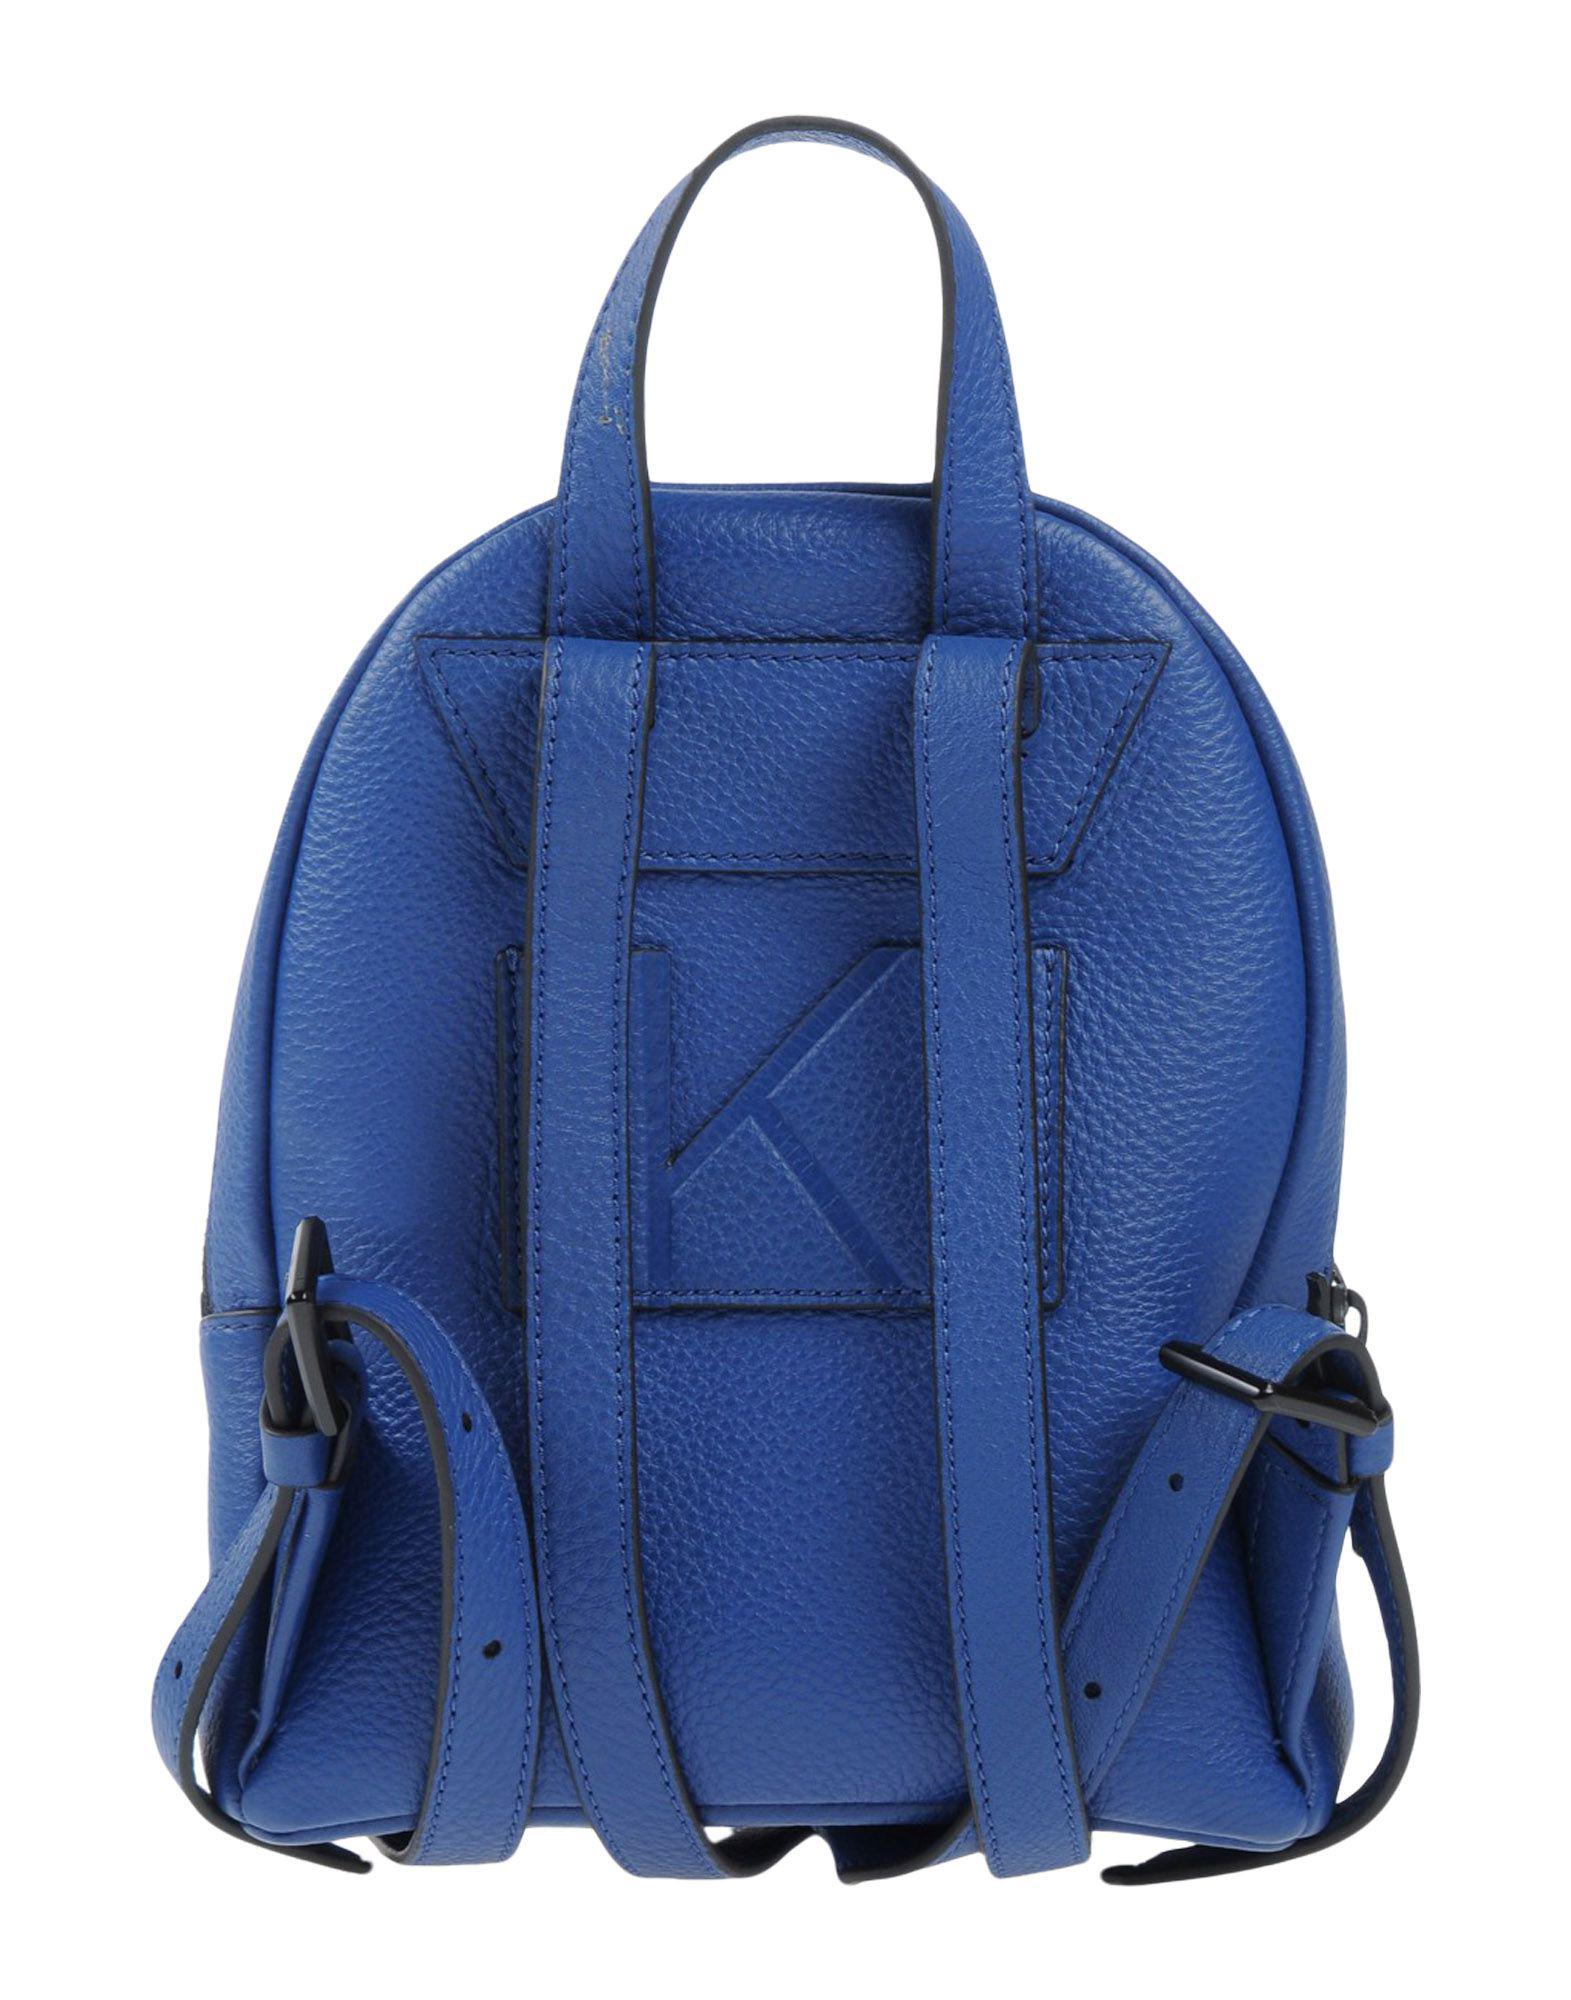 Kendall + Kylie Sloane Mini Leather Backpack in Blue - Lyst